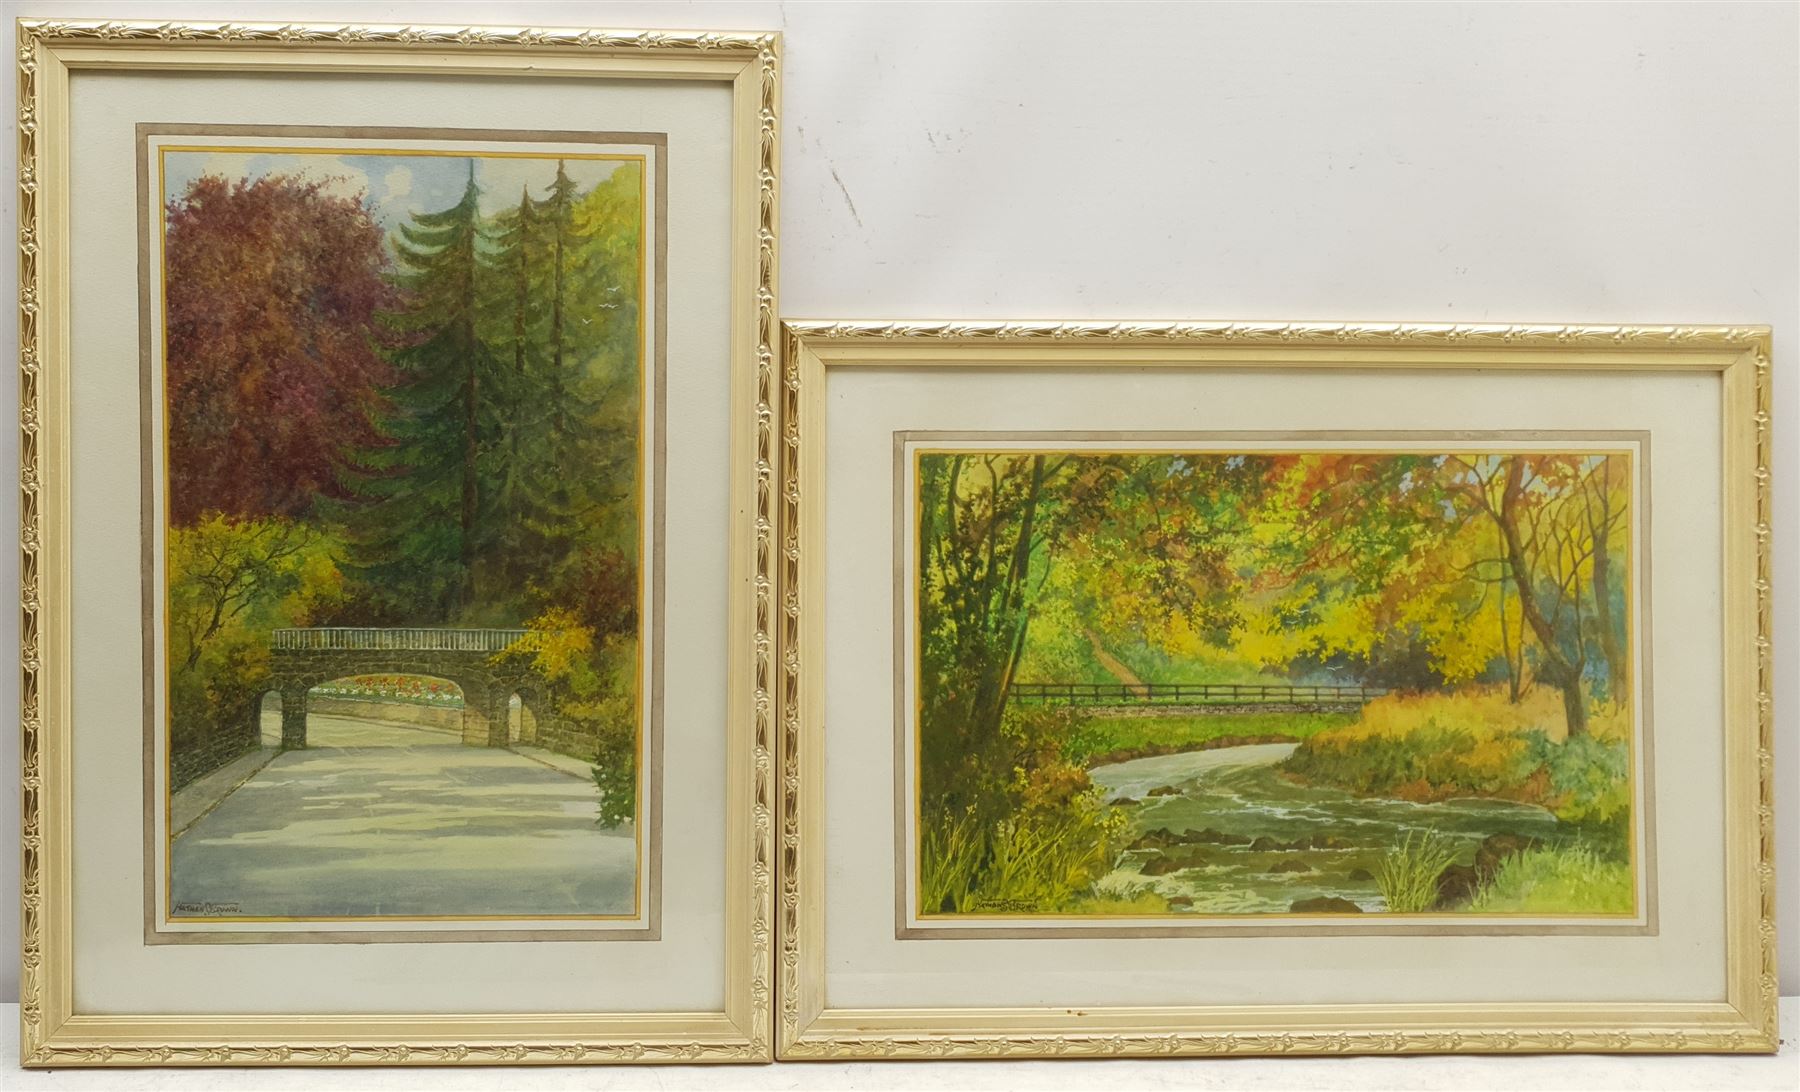 Nathan Stanley Brown (British 1890-1980): 'Bridge at Hackness' and 'Forge Valley at Autumn'